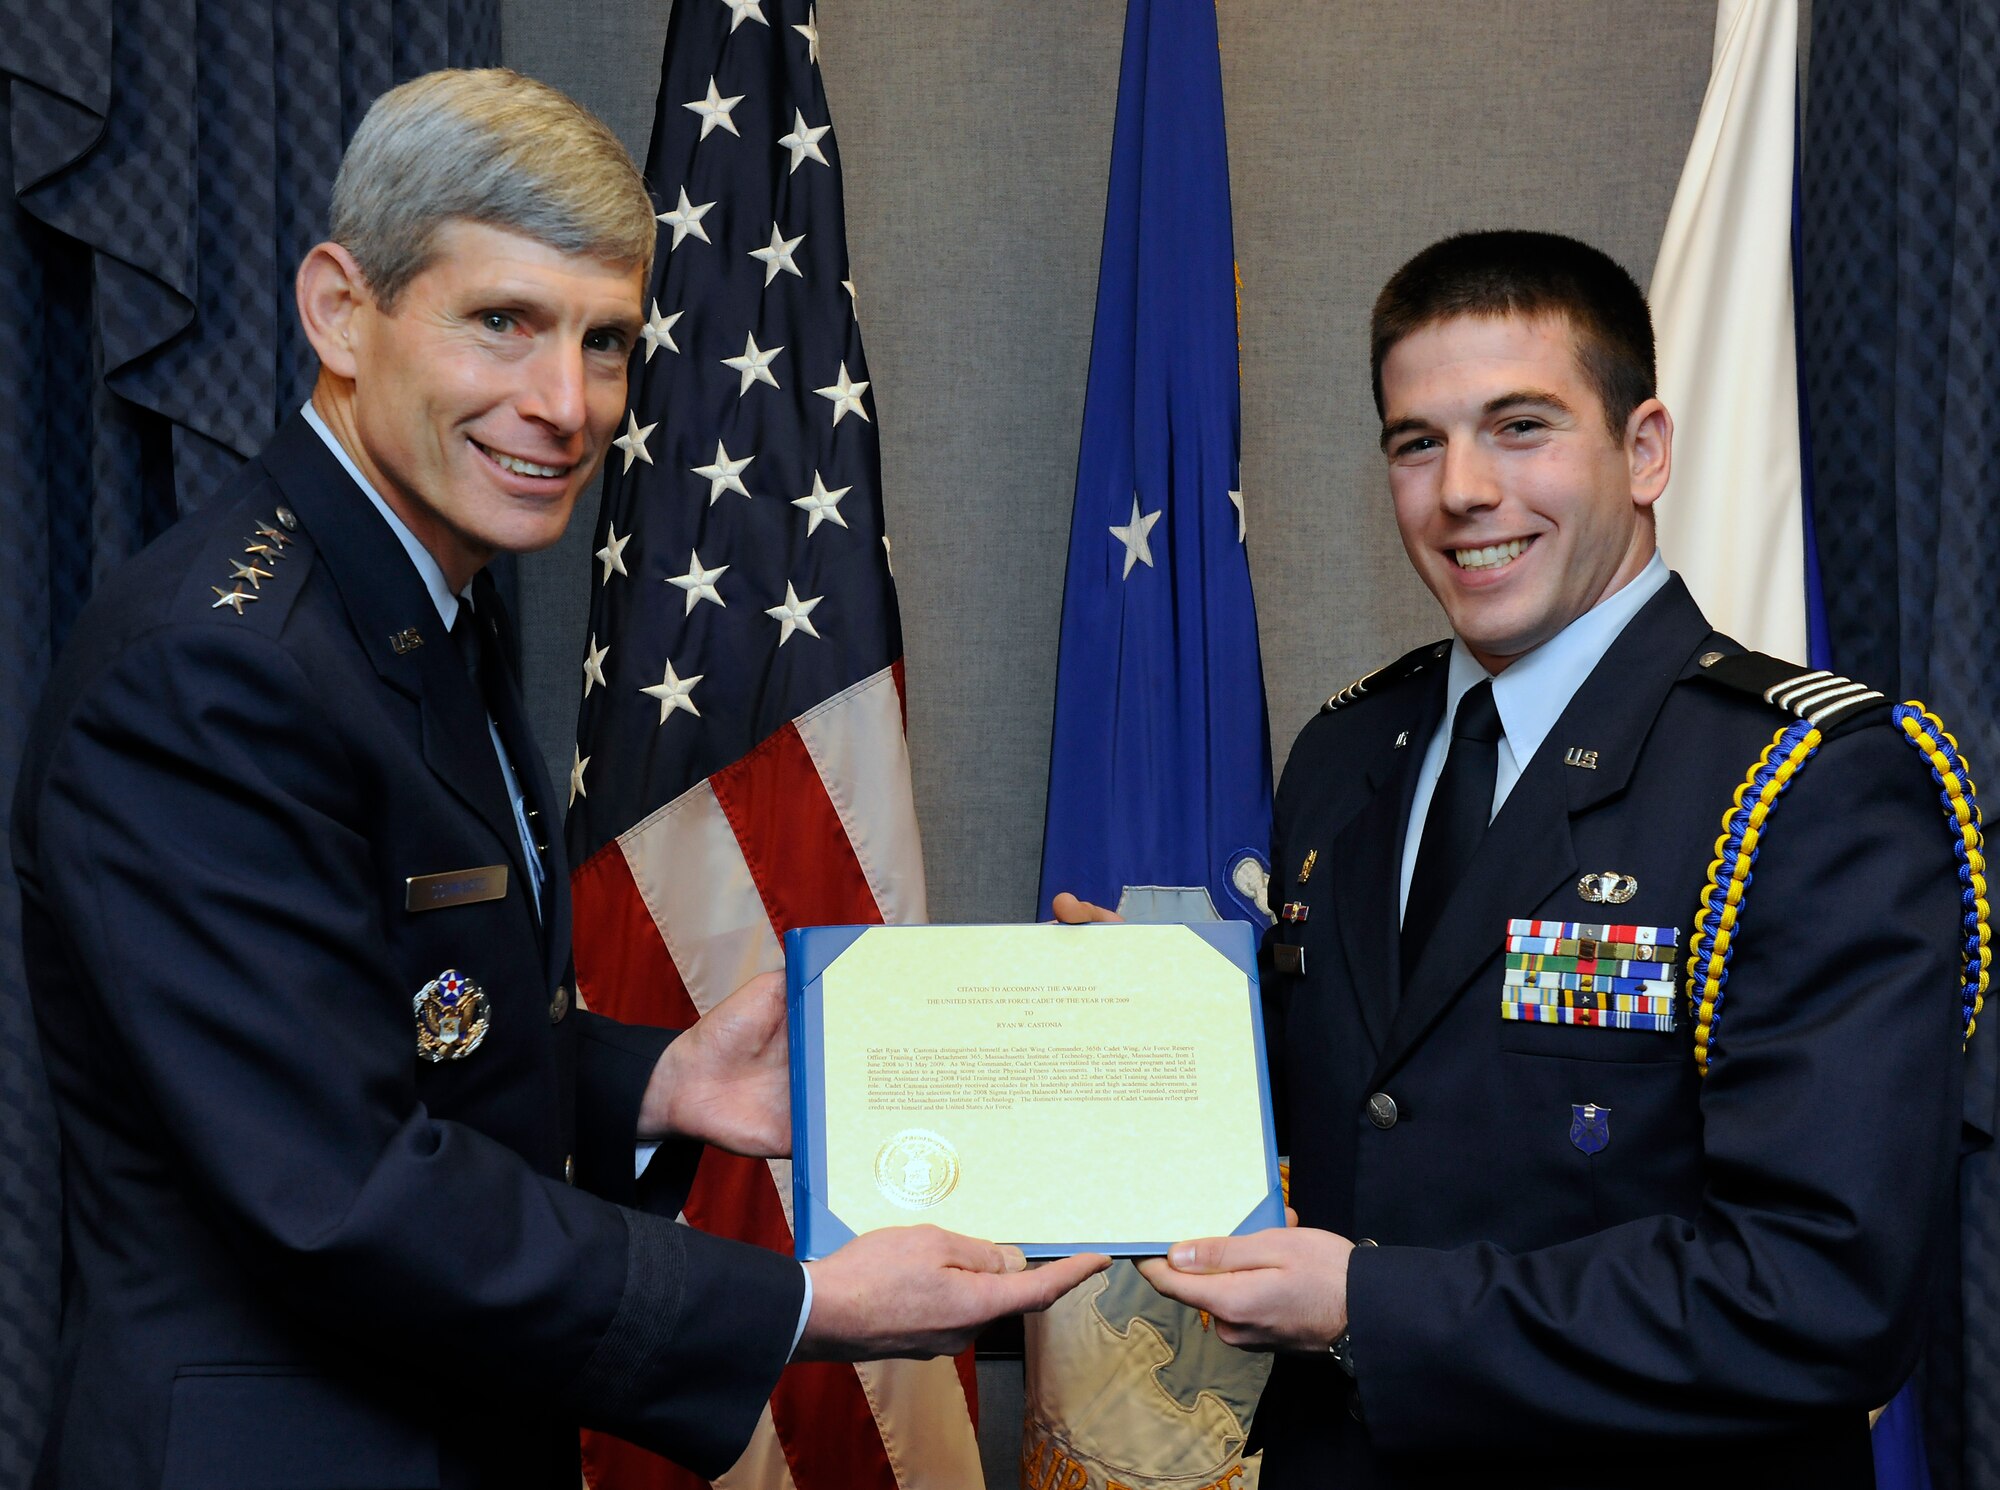 Air Force Chief of Staff Gen. Norton Schwartz presents Cadet Col. Ryan W. Castonia the citation accompanying his U.S. Air Force Cadet of the Year award for 2009 in the Pentagon April 5, 2010.  Cadet Castonia is a graduate student at Massachusetts Institute of Technology and a member of MIT's Reserve Officer Training Corps.  He also was honored by the Air Squadron, a private British aviation organization which has spnsored the award since 2000, and received the Air Squadron's coin from Air Commodore Ian Elliot, a Royal Air Force attache' assigned to the British Embassy in Washington.  (U.S. Air Force photo/Scott M. Ash)